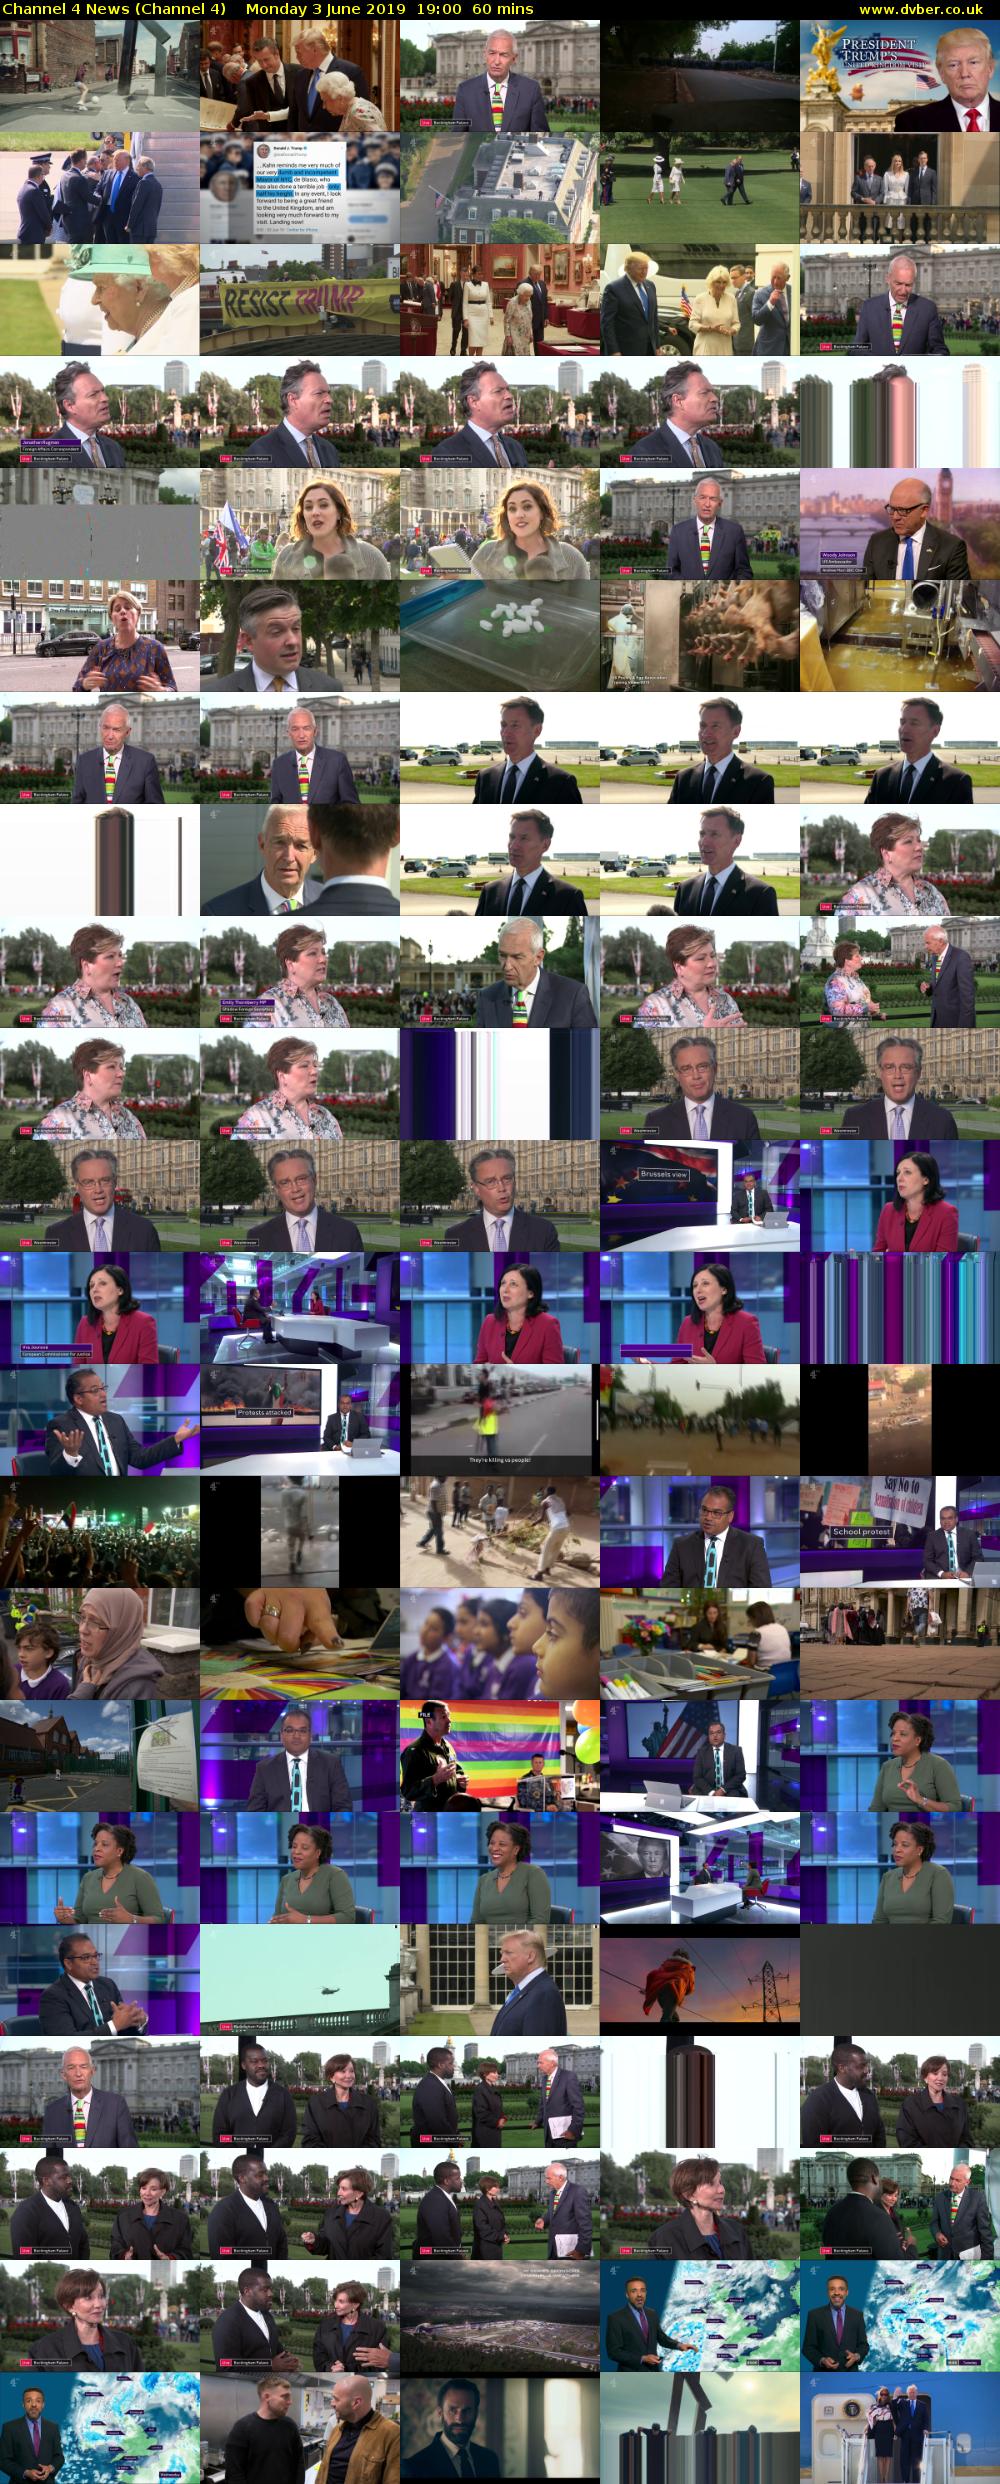 Channel 4 News (Channel 4) Monday 3 June 2019 19:00 - 20:00